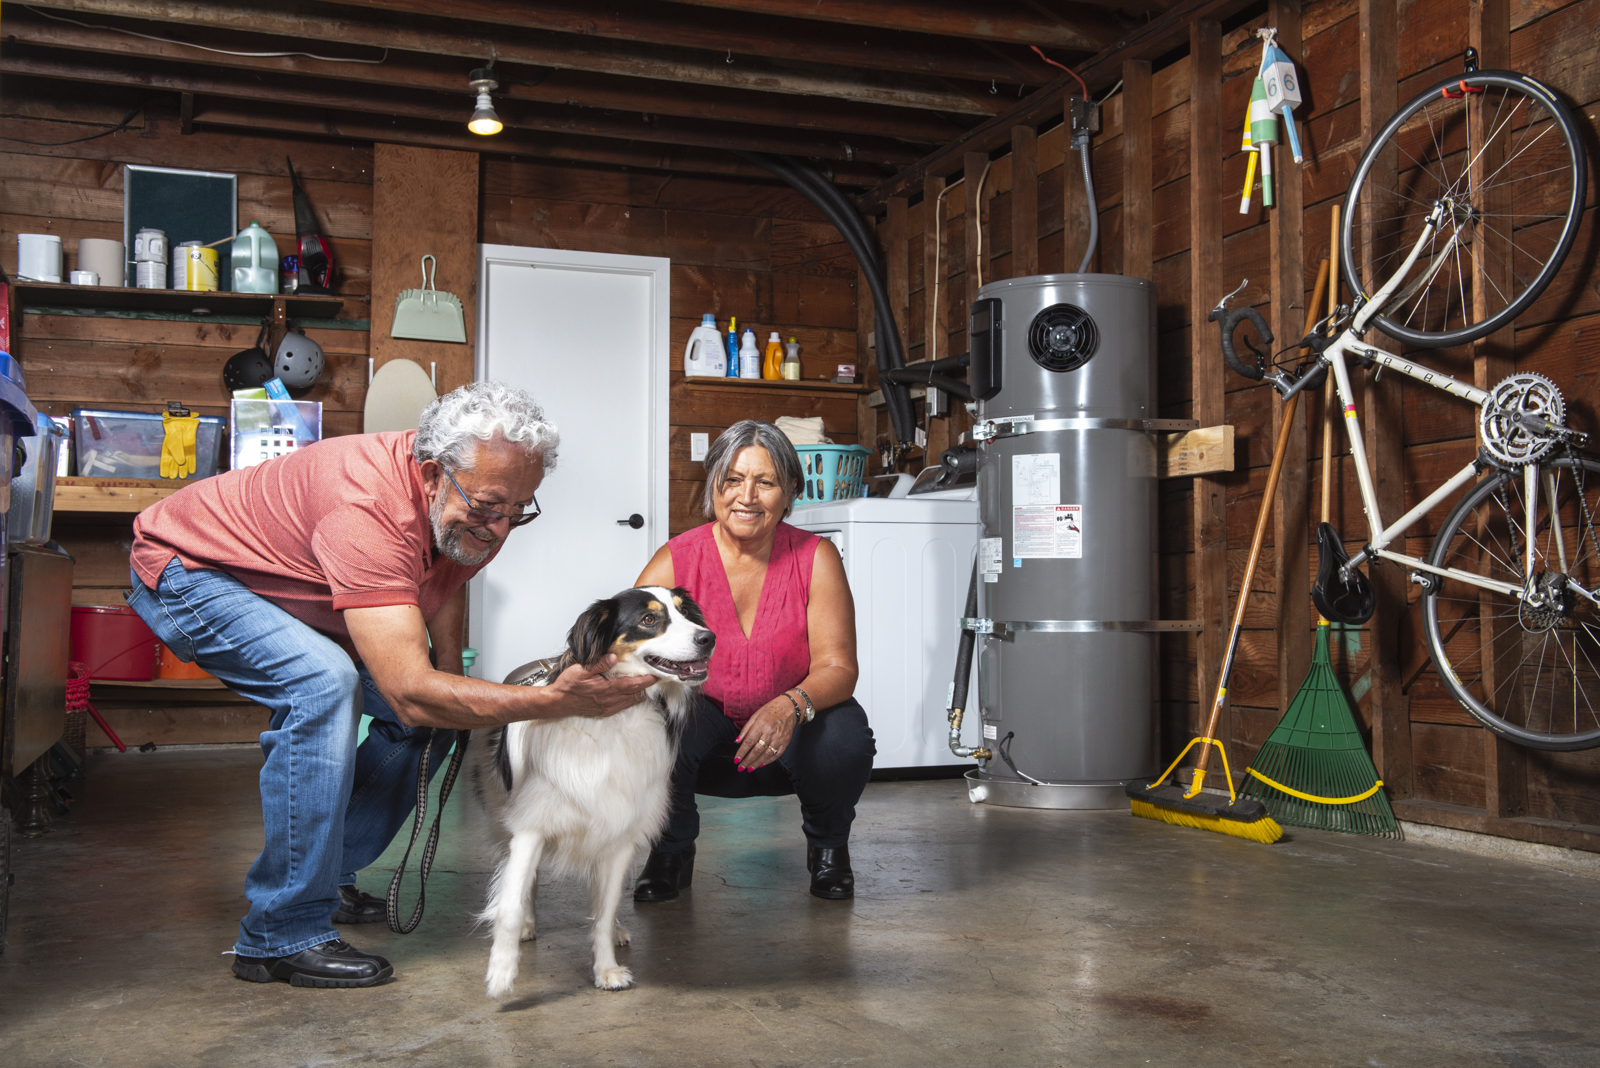 An older couple crouches in the garage to pet their dog. A hybrid electric water heater is in the background saving energy.